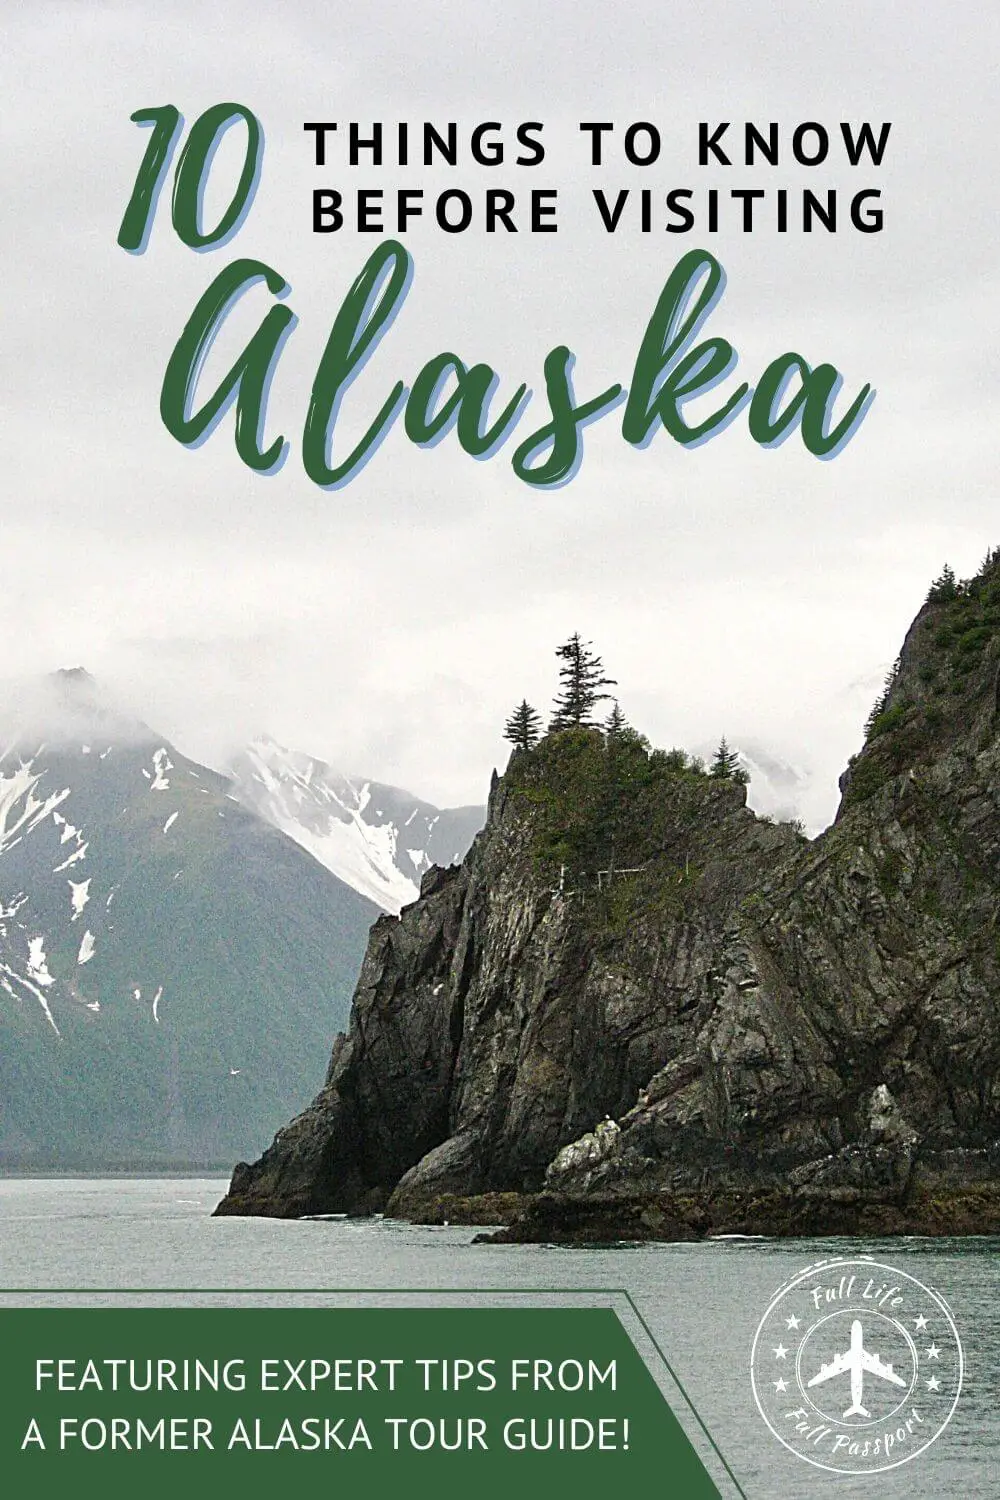 10 Things to Know Before Visiting Alaska